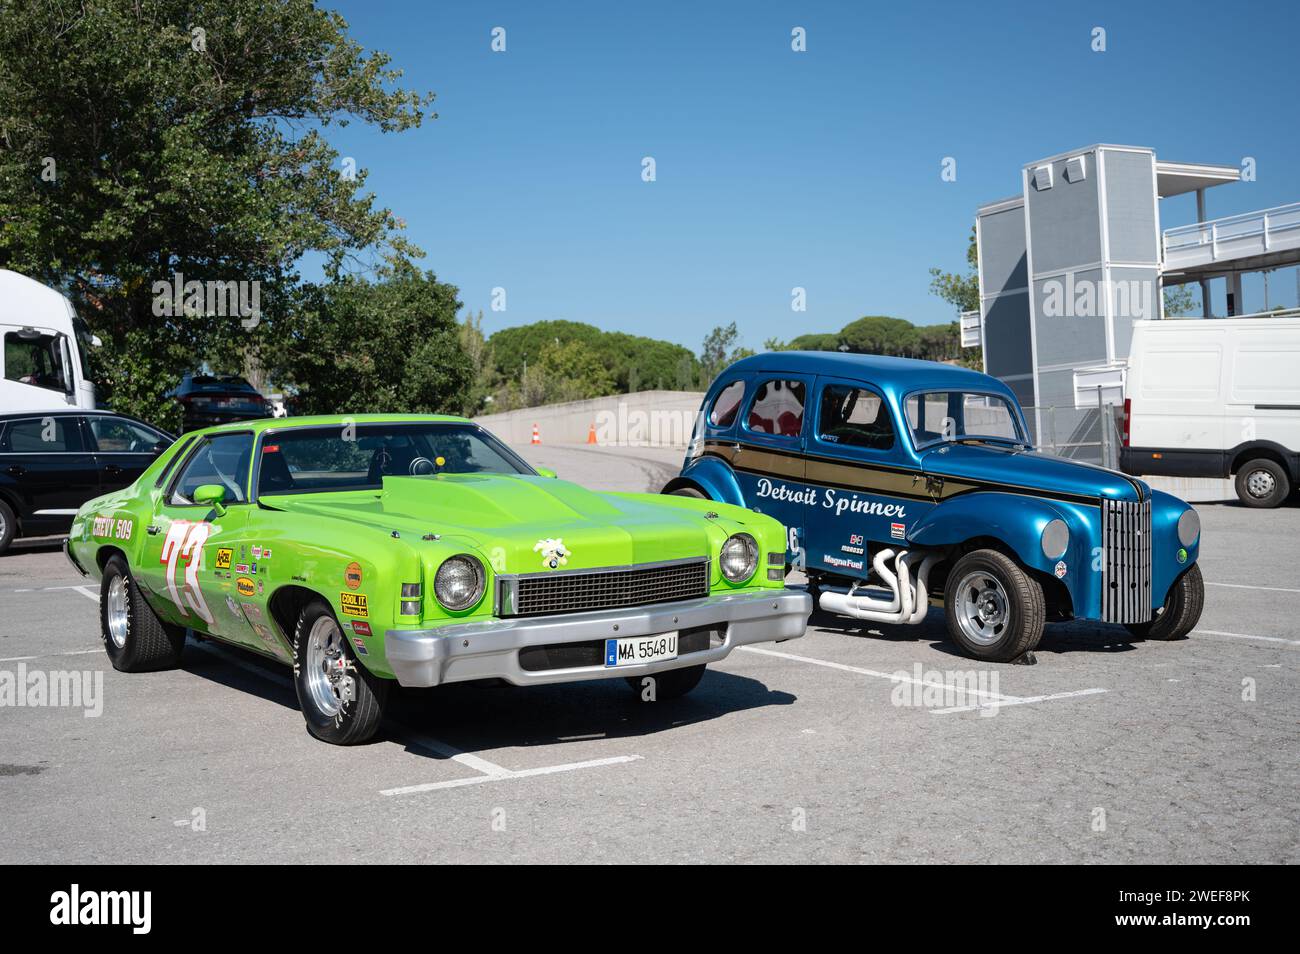 impressive green second-generation Chevrolet Montecarlo American muscle car prepared for quarter-mile acceleration races next to a dragster Stock Photo